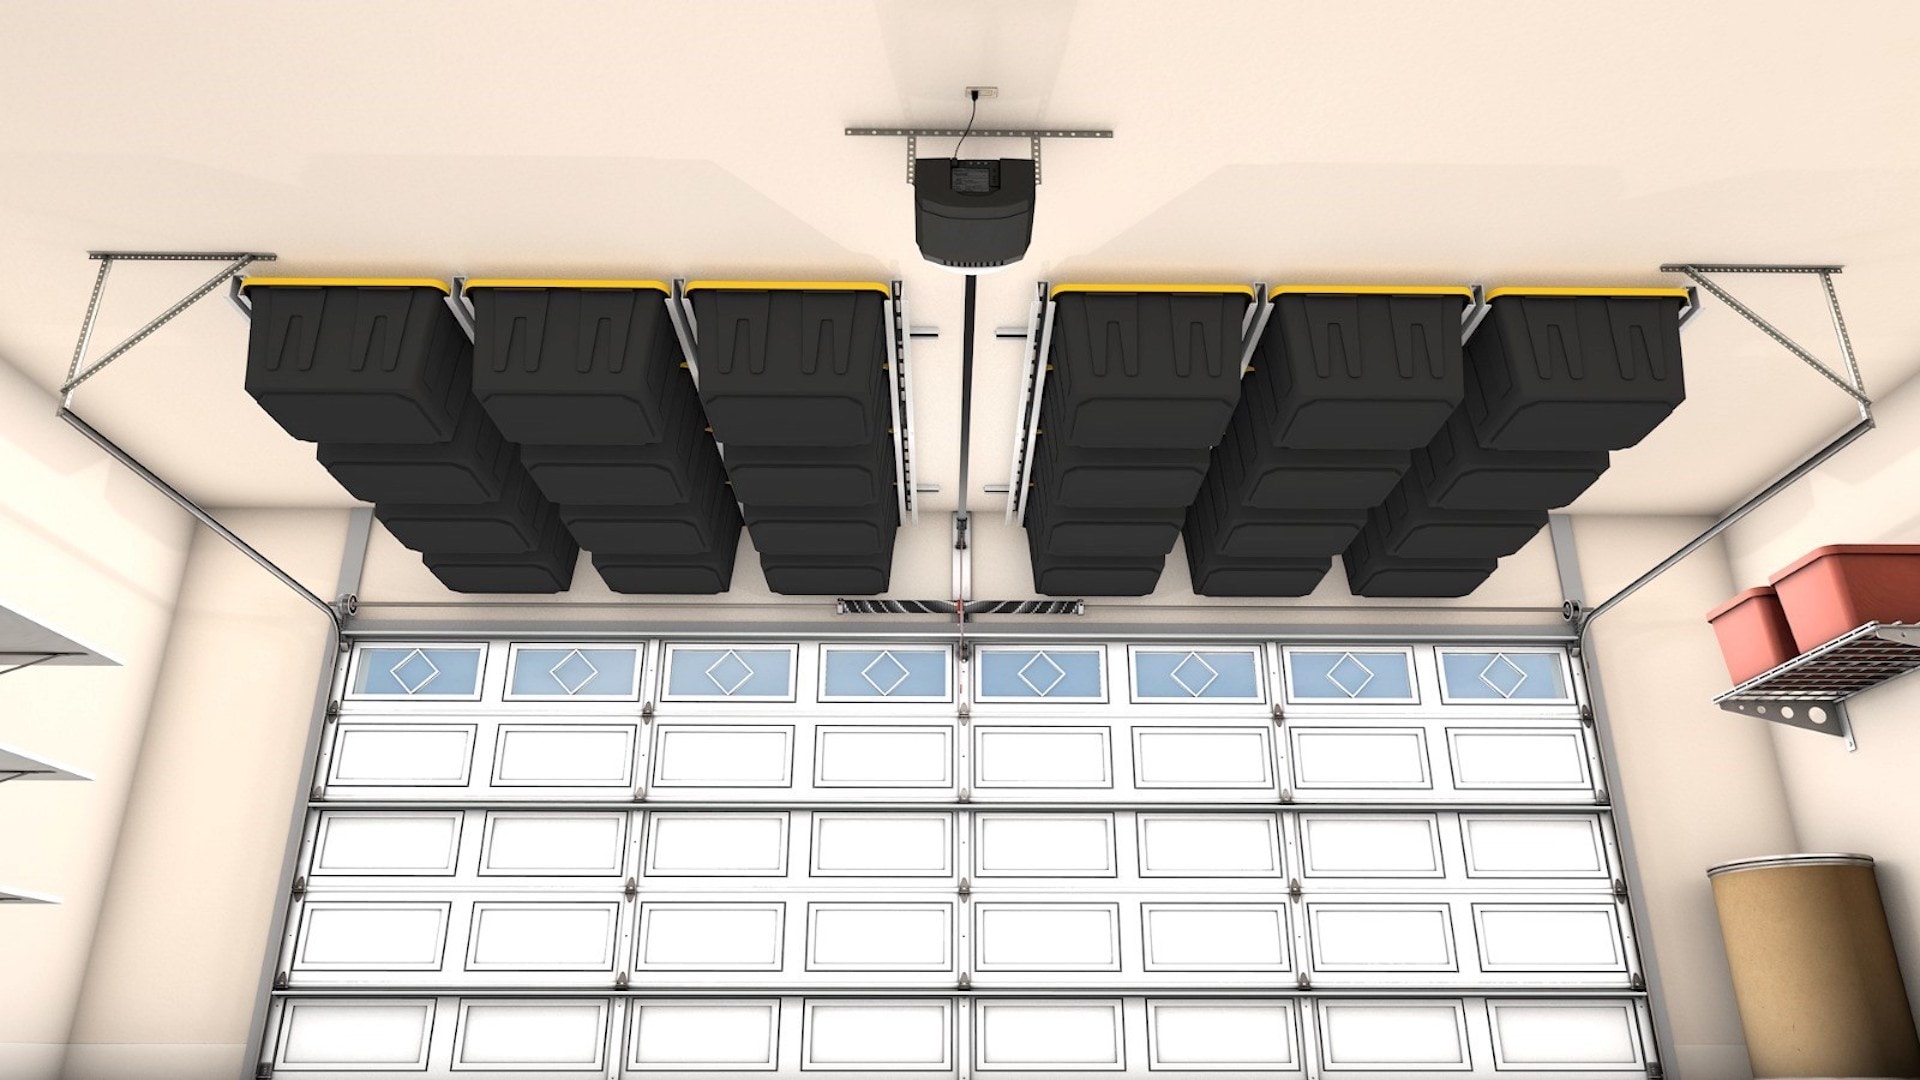 Bin Slide Overhead Storage System - Store Totes on your Ceiling!